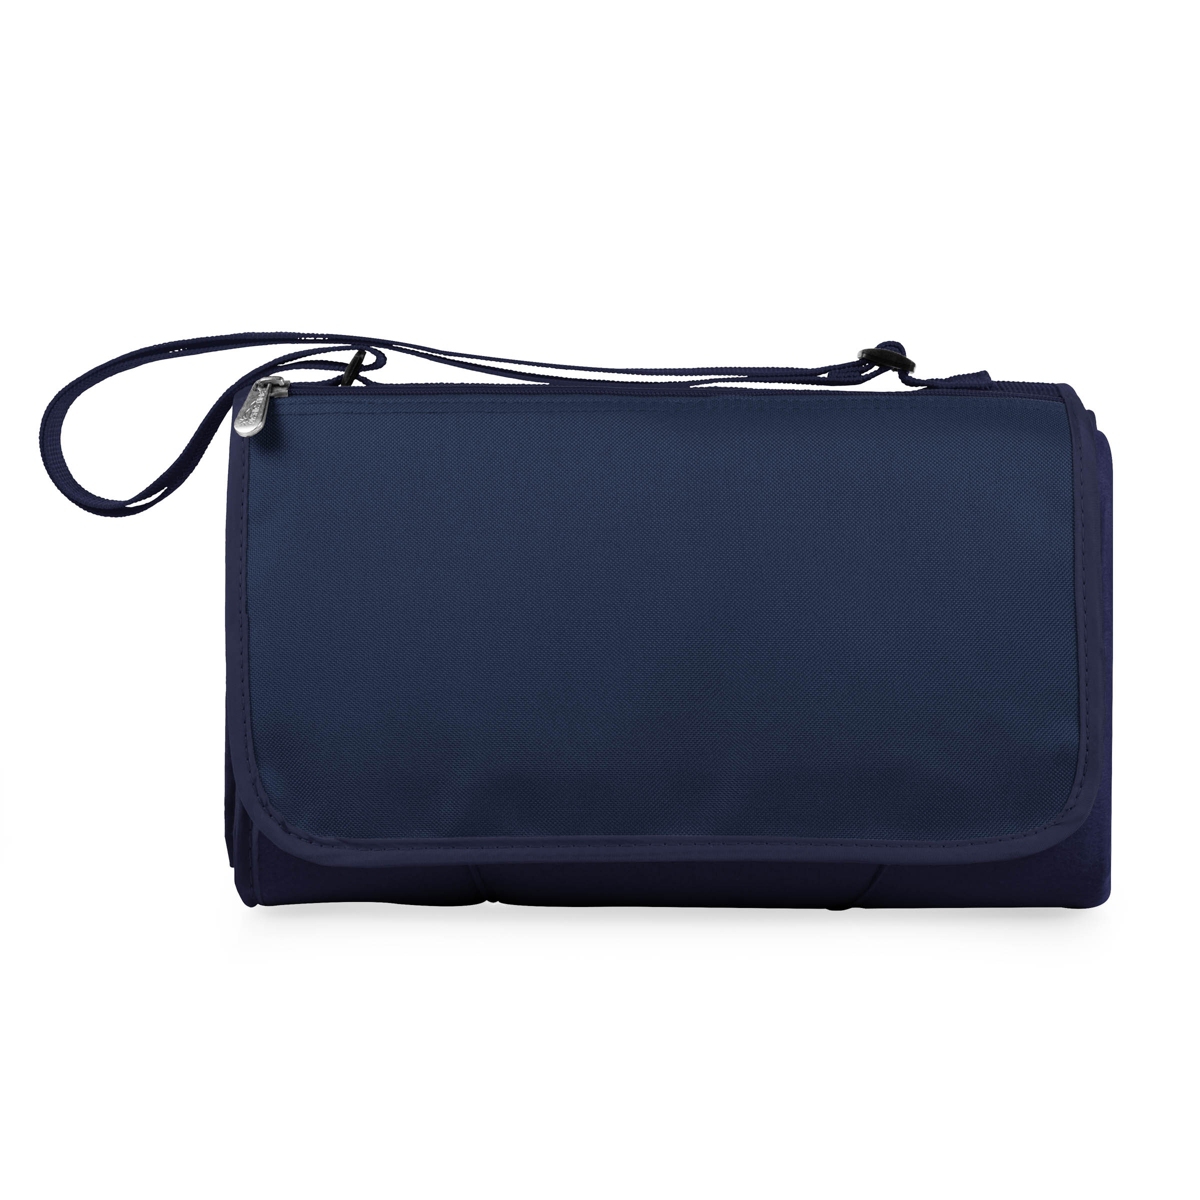 by Picnic Time Blanket Tote Outdoor Picnic Blanket - Navy